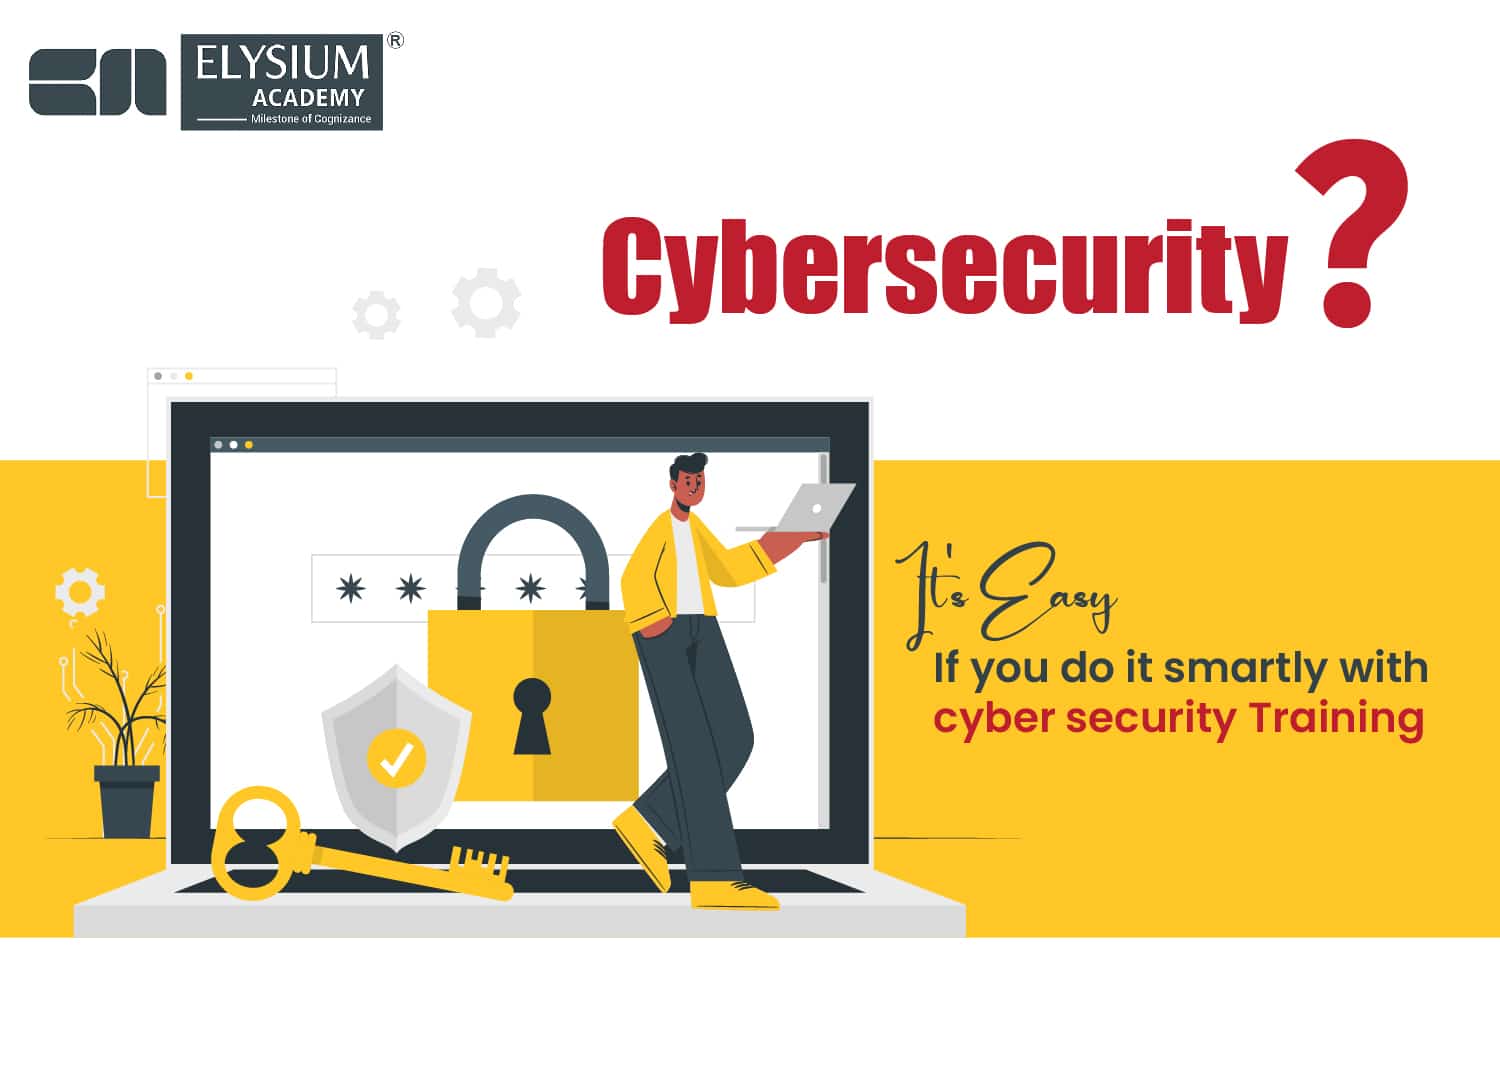 Cybersecurity courses